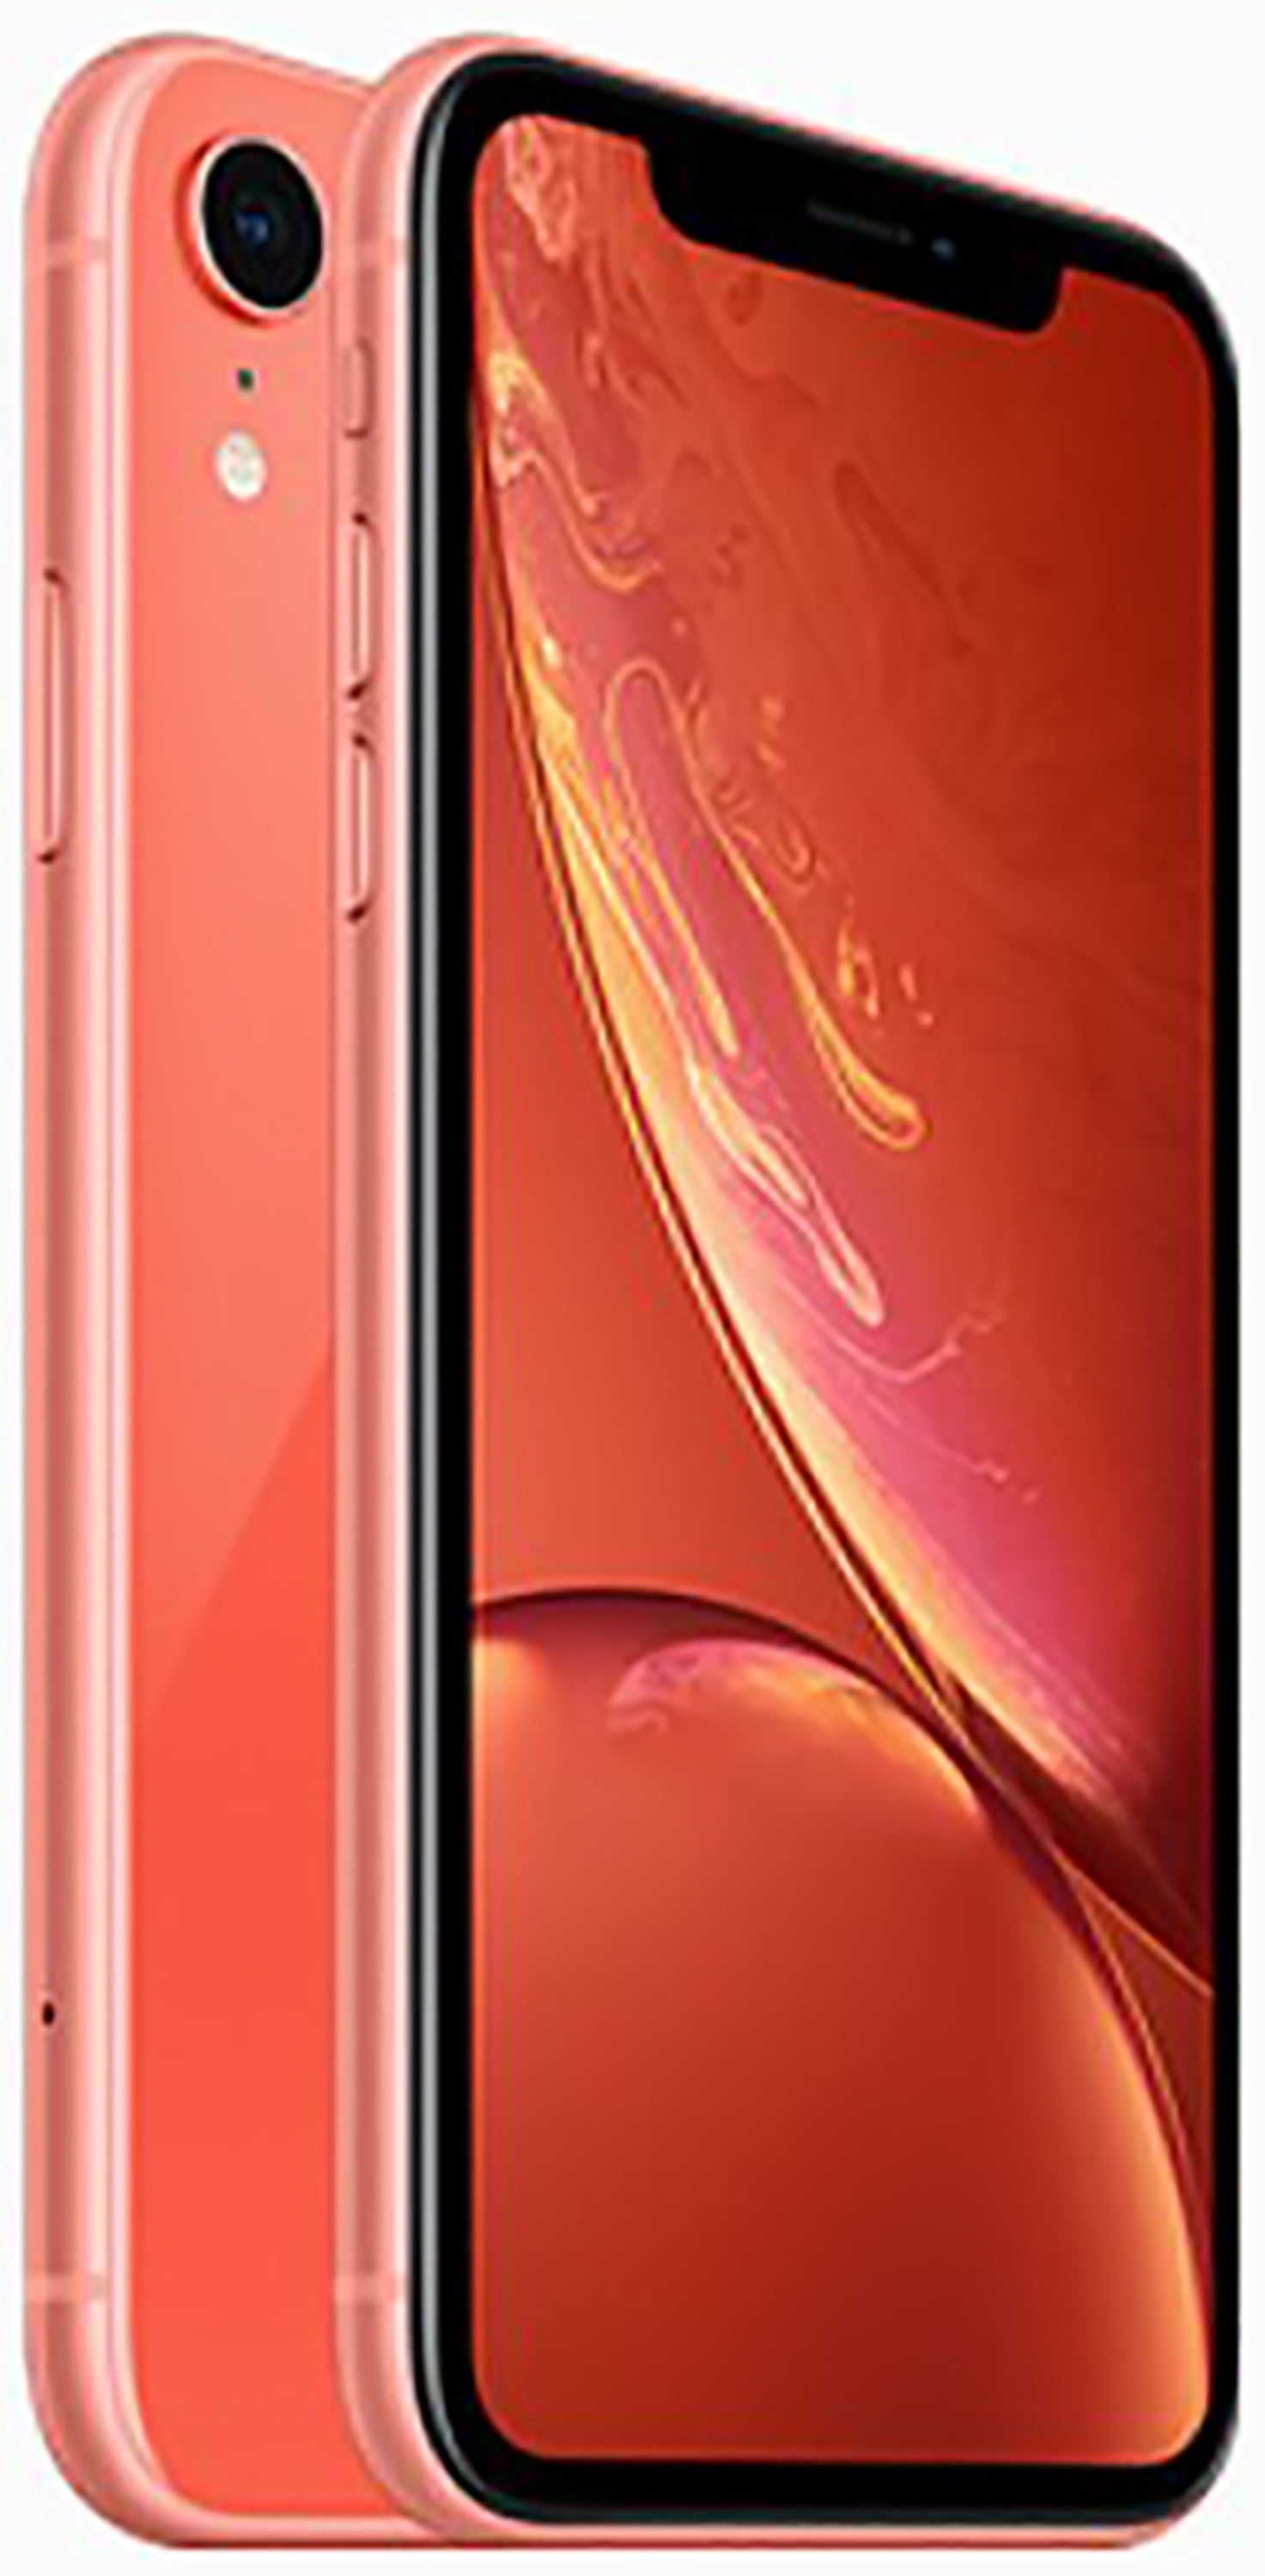 Apple iPhone XR, 128GB, Red for GSM Carriers (Renewed)